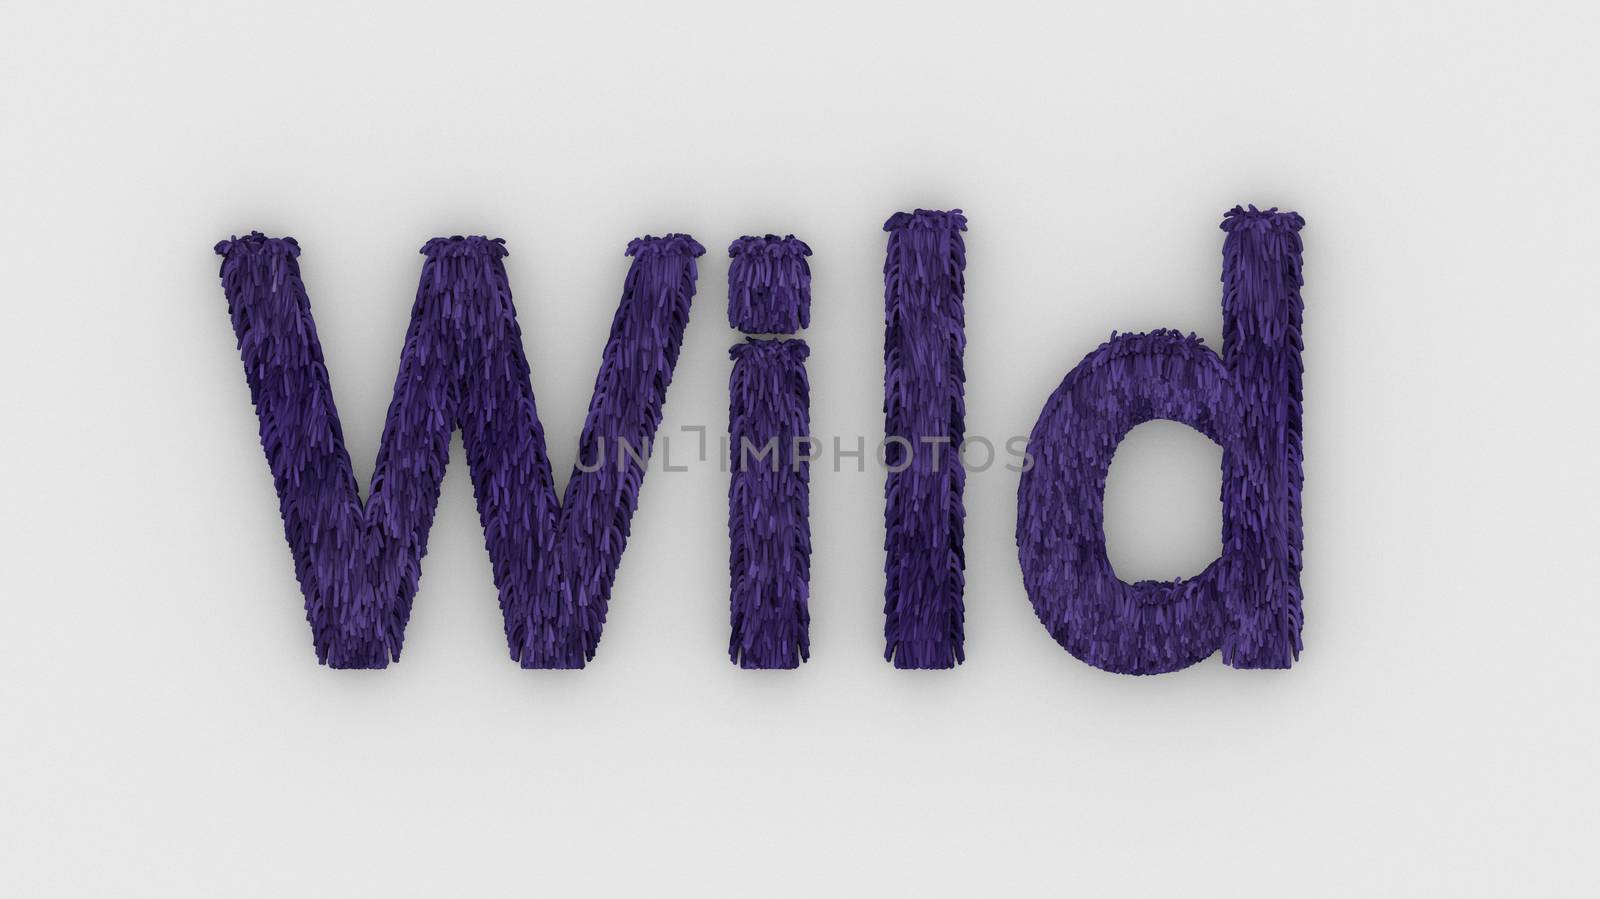 Wild - 3d word violet on white background. render furry letters. hair. wilds fur. emblem logo design template. wild animals, feeling and relationships. beasts of nature